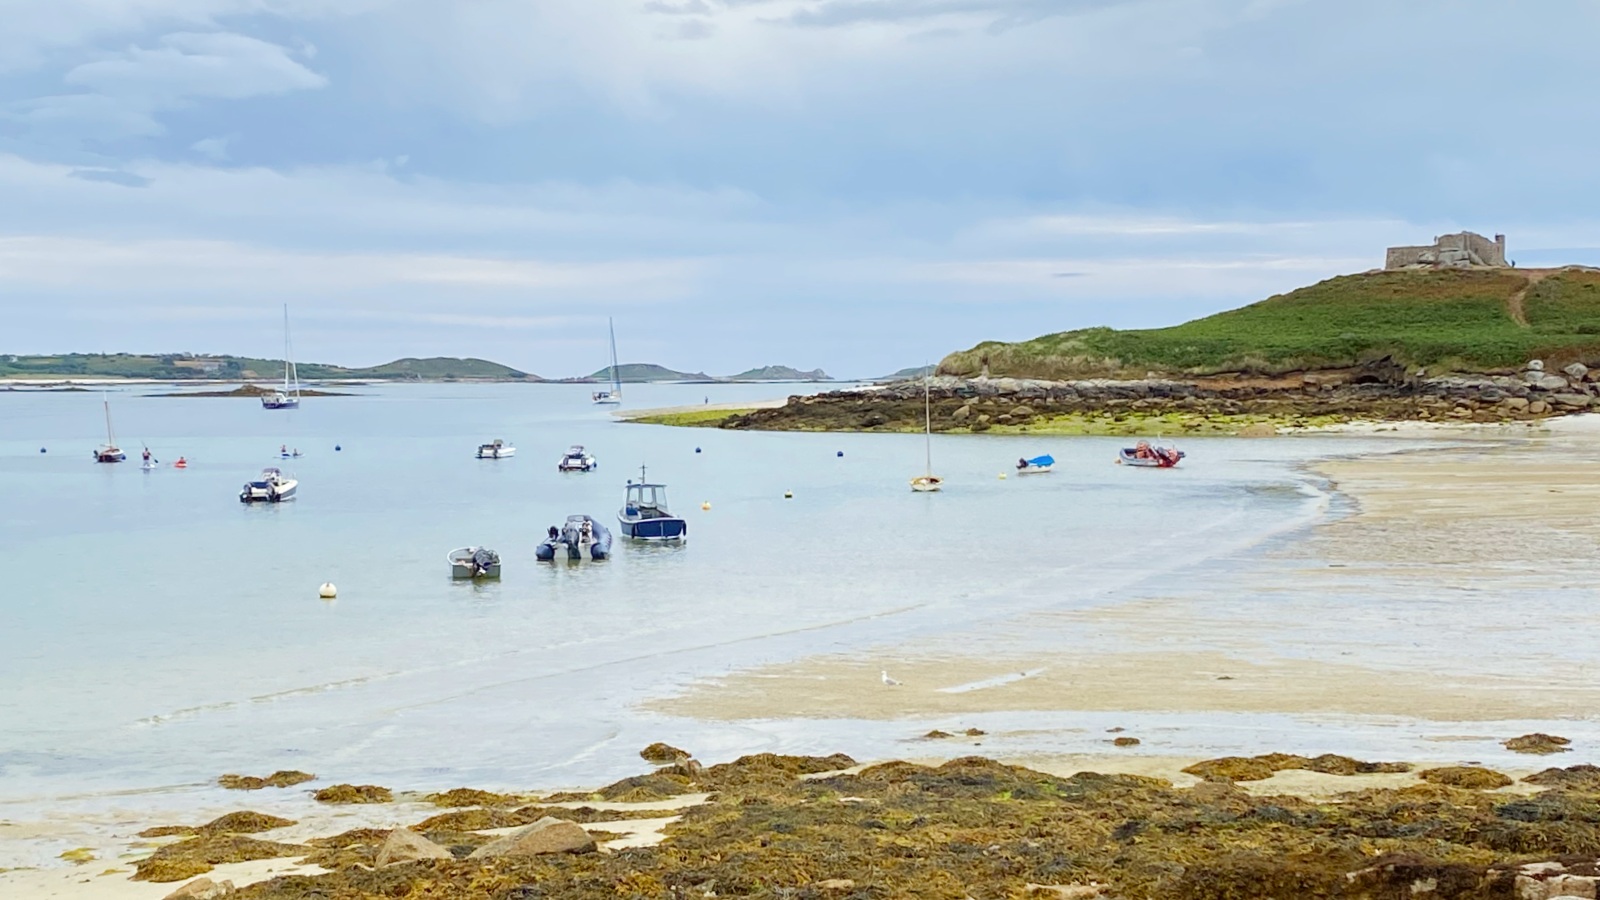 Views from Old Grimsby Quay, Tresco